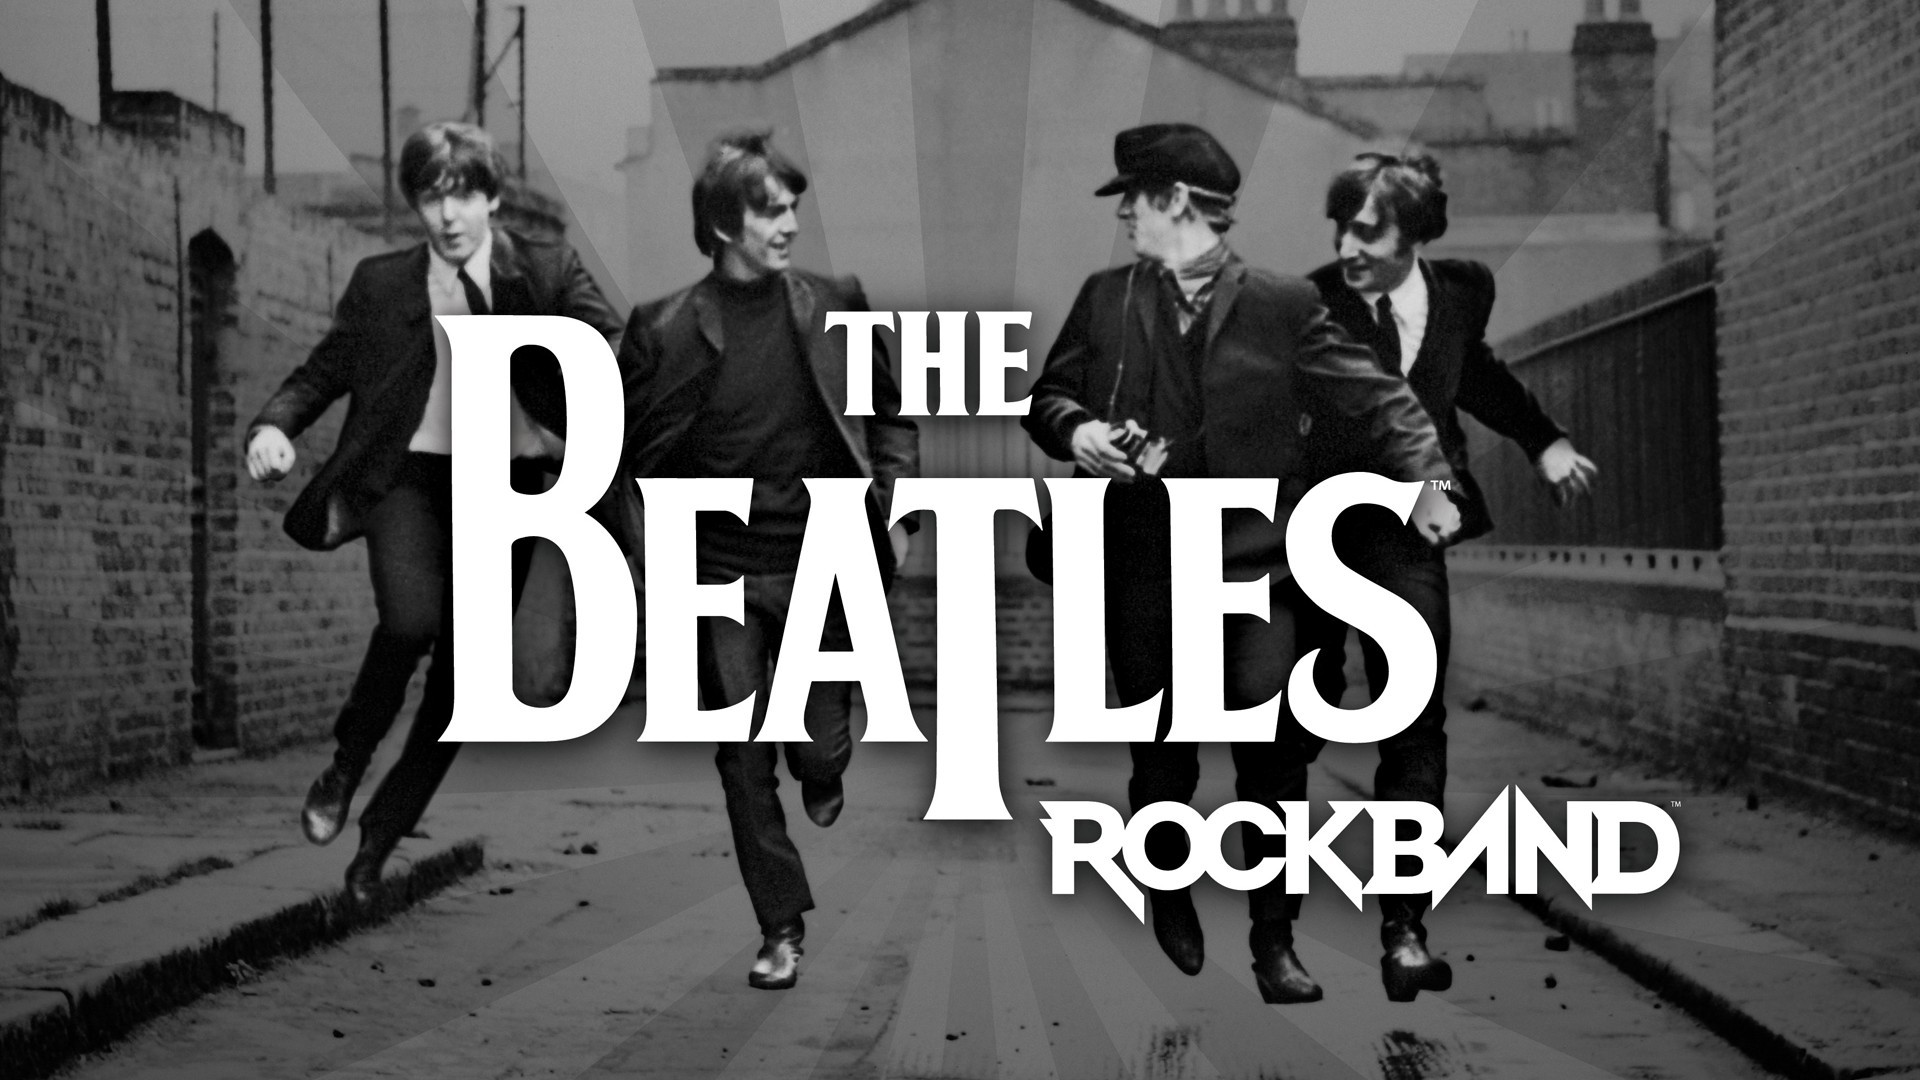 1920x1080 The Beatles Rock Band  HD Image Music and Bands 